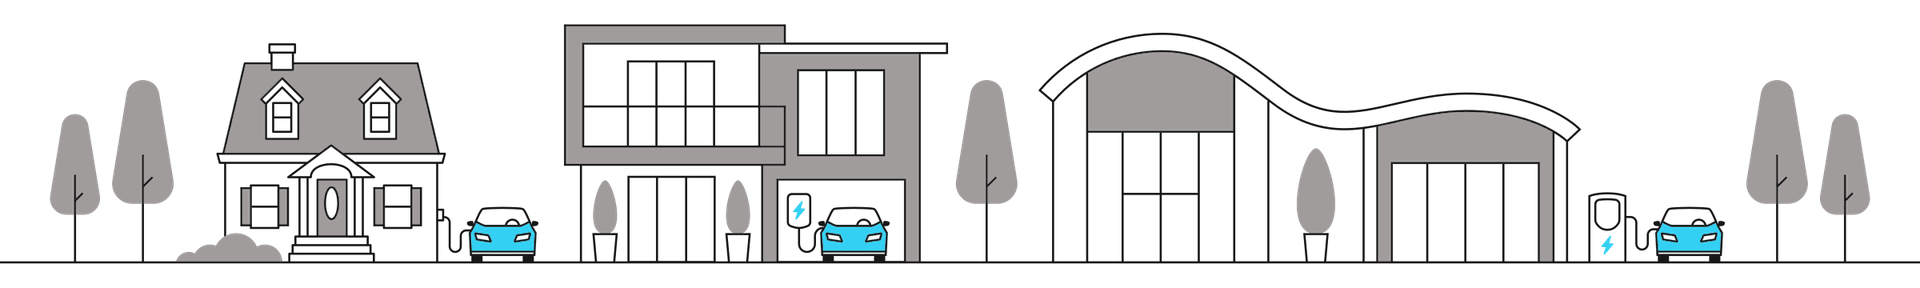 Simplistic graphic of electric vehicles being charged at home